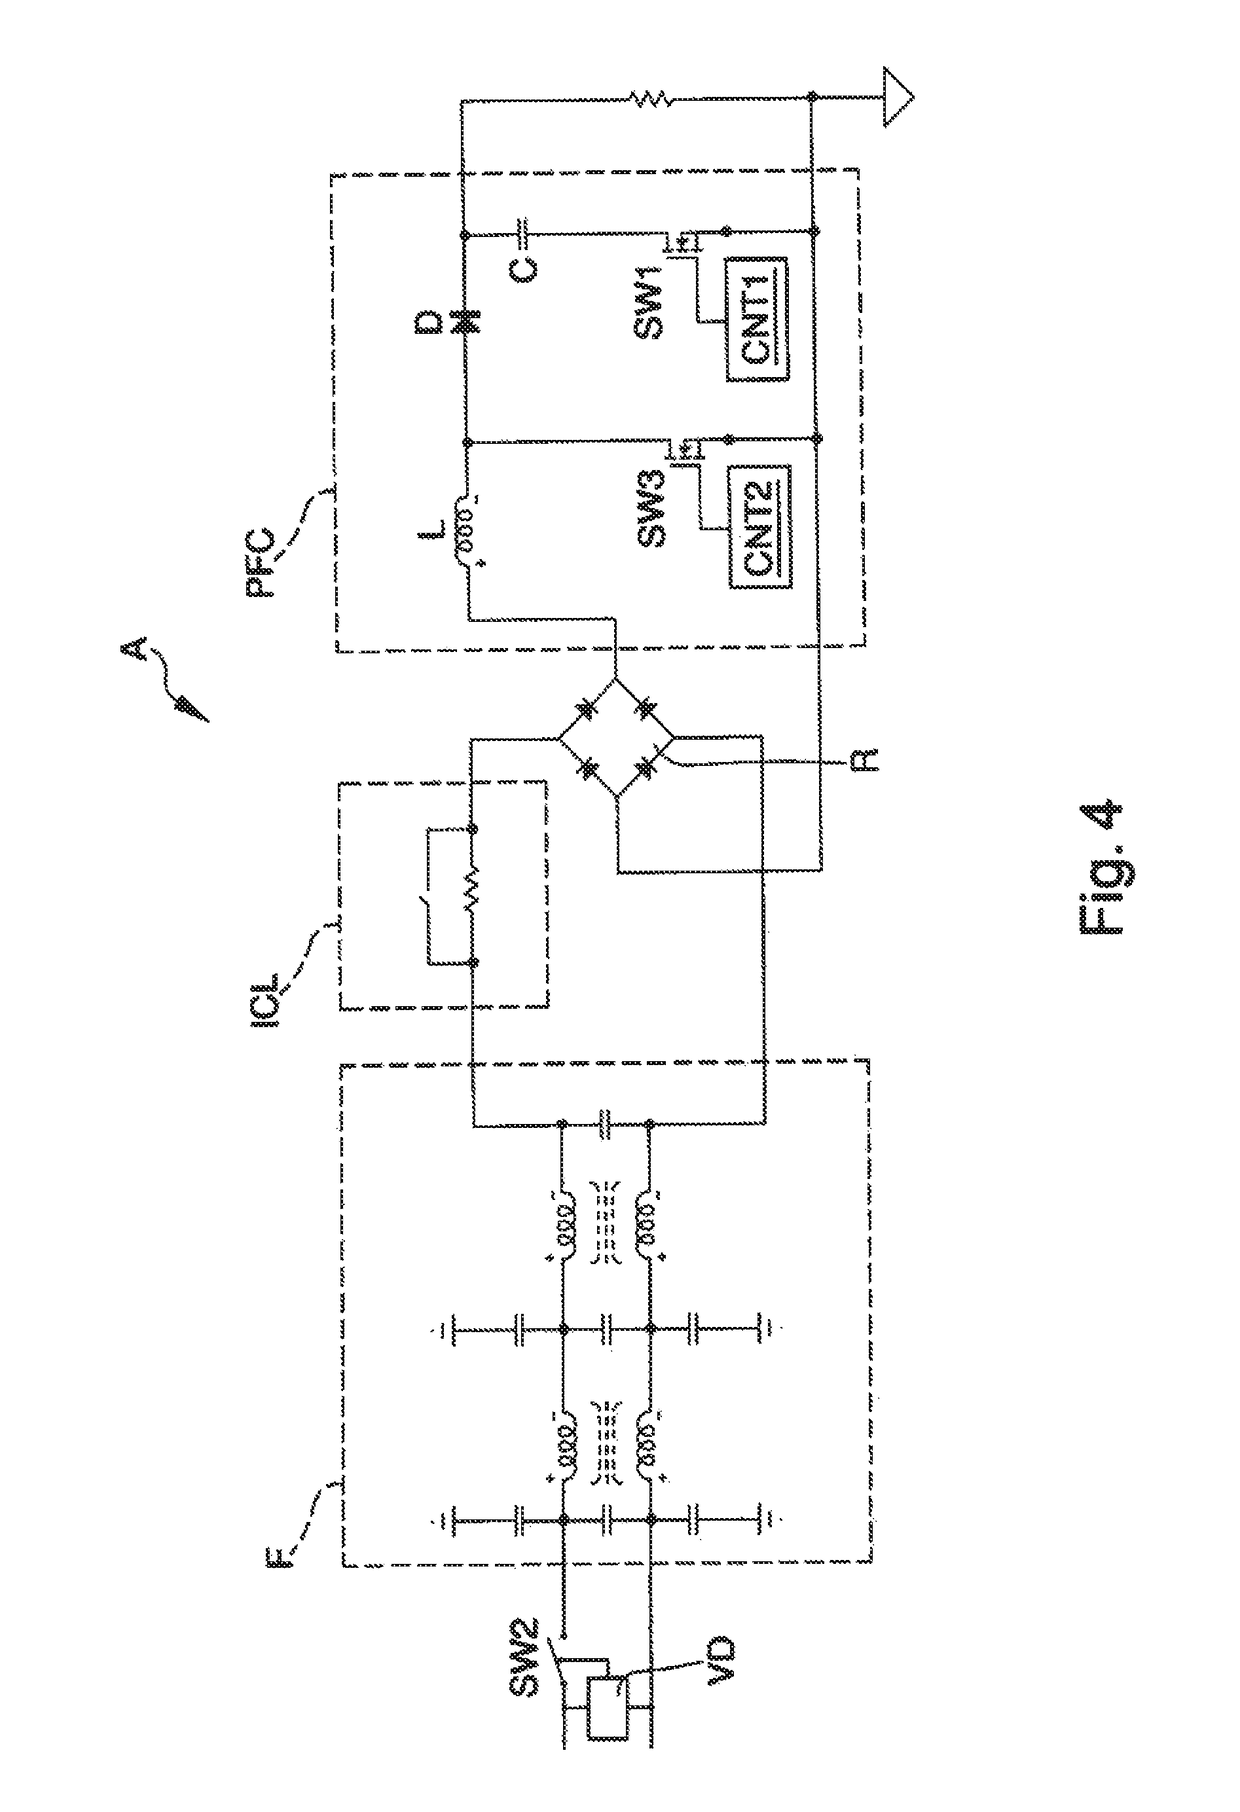 Power supply stage of an electric appliance, in particular a battery charger for charging batteries of electric vehicles